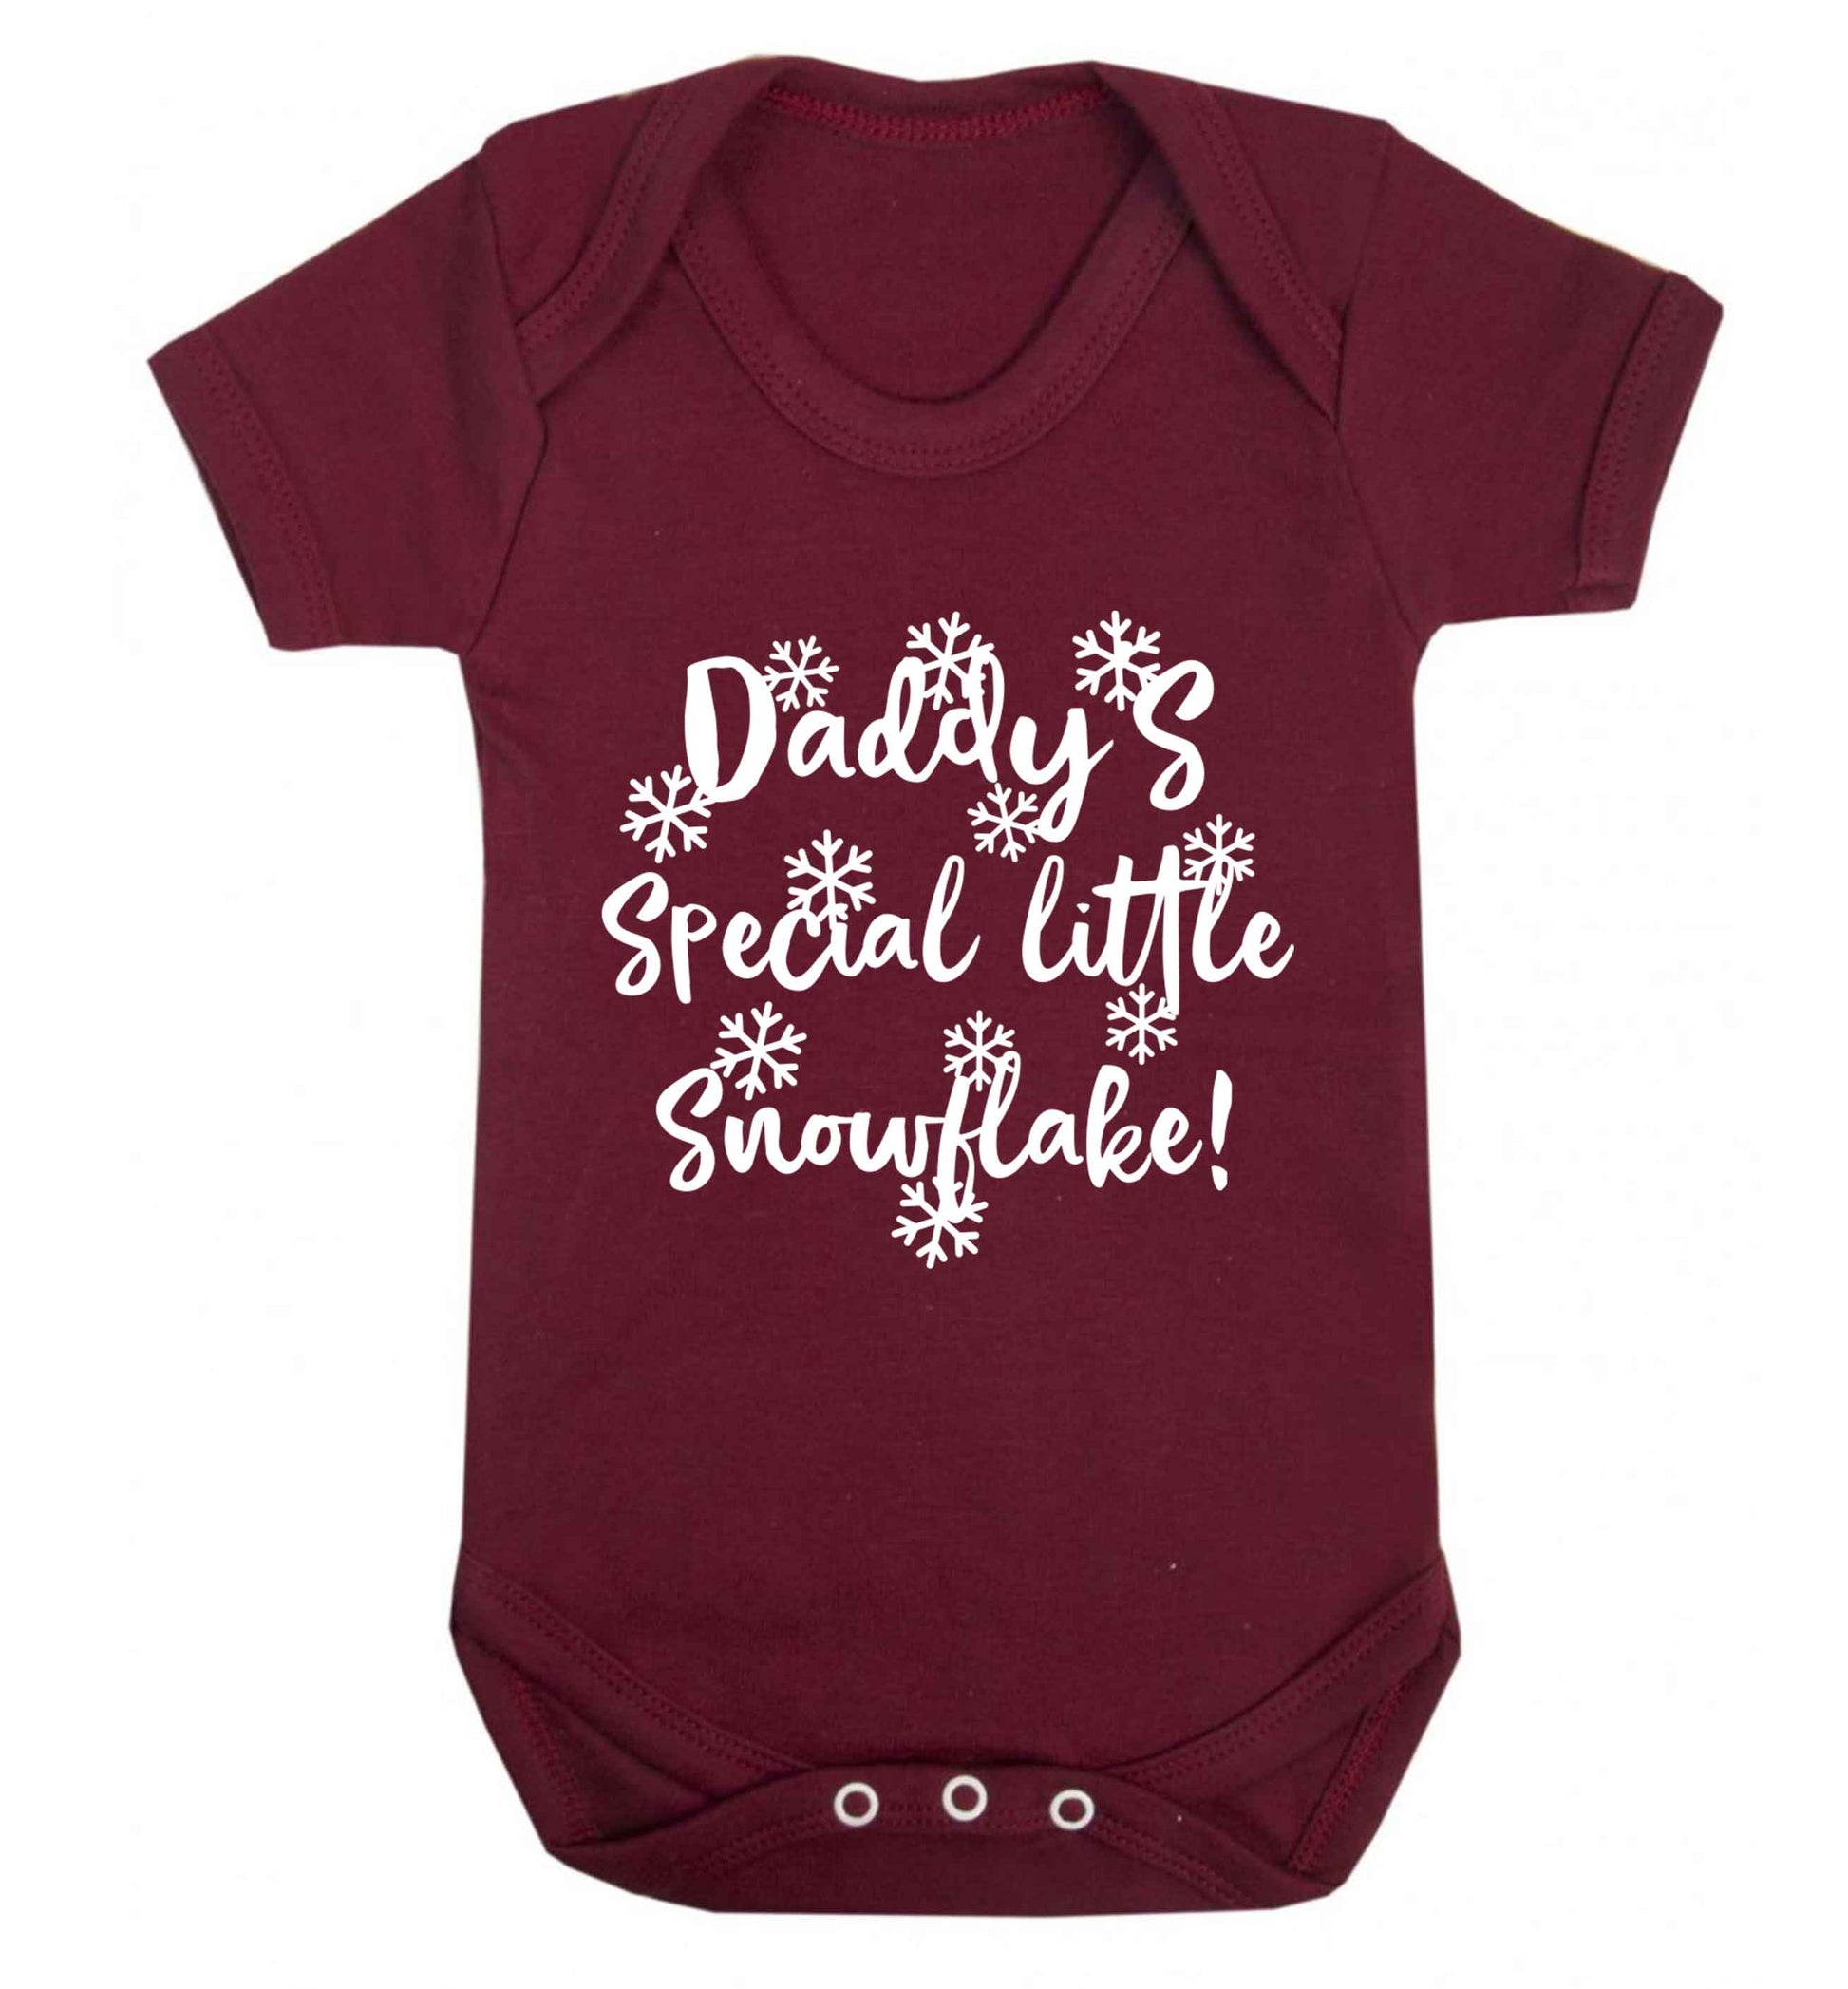 Daddy's special little snowflake Baby Vest maroon 18-24 months